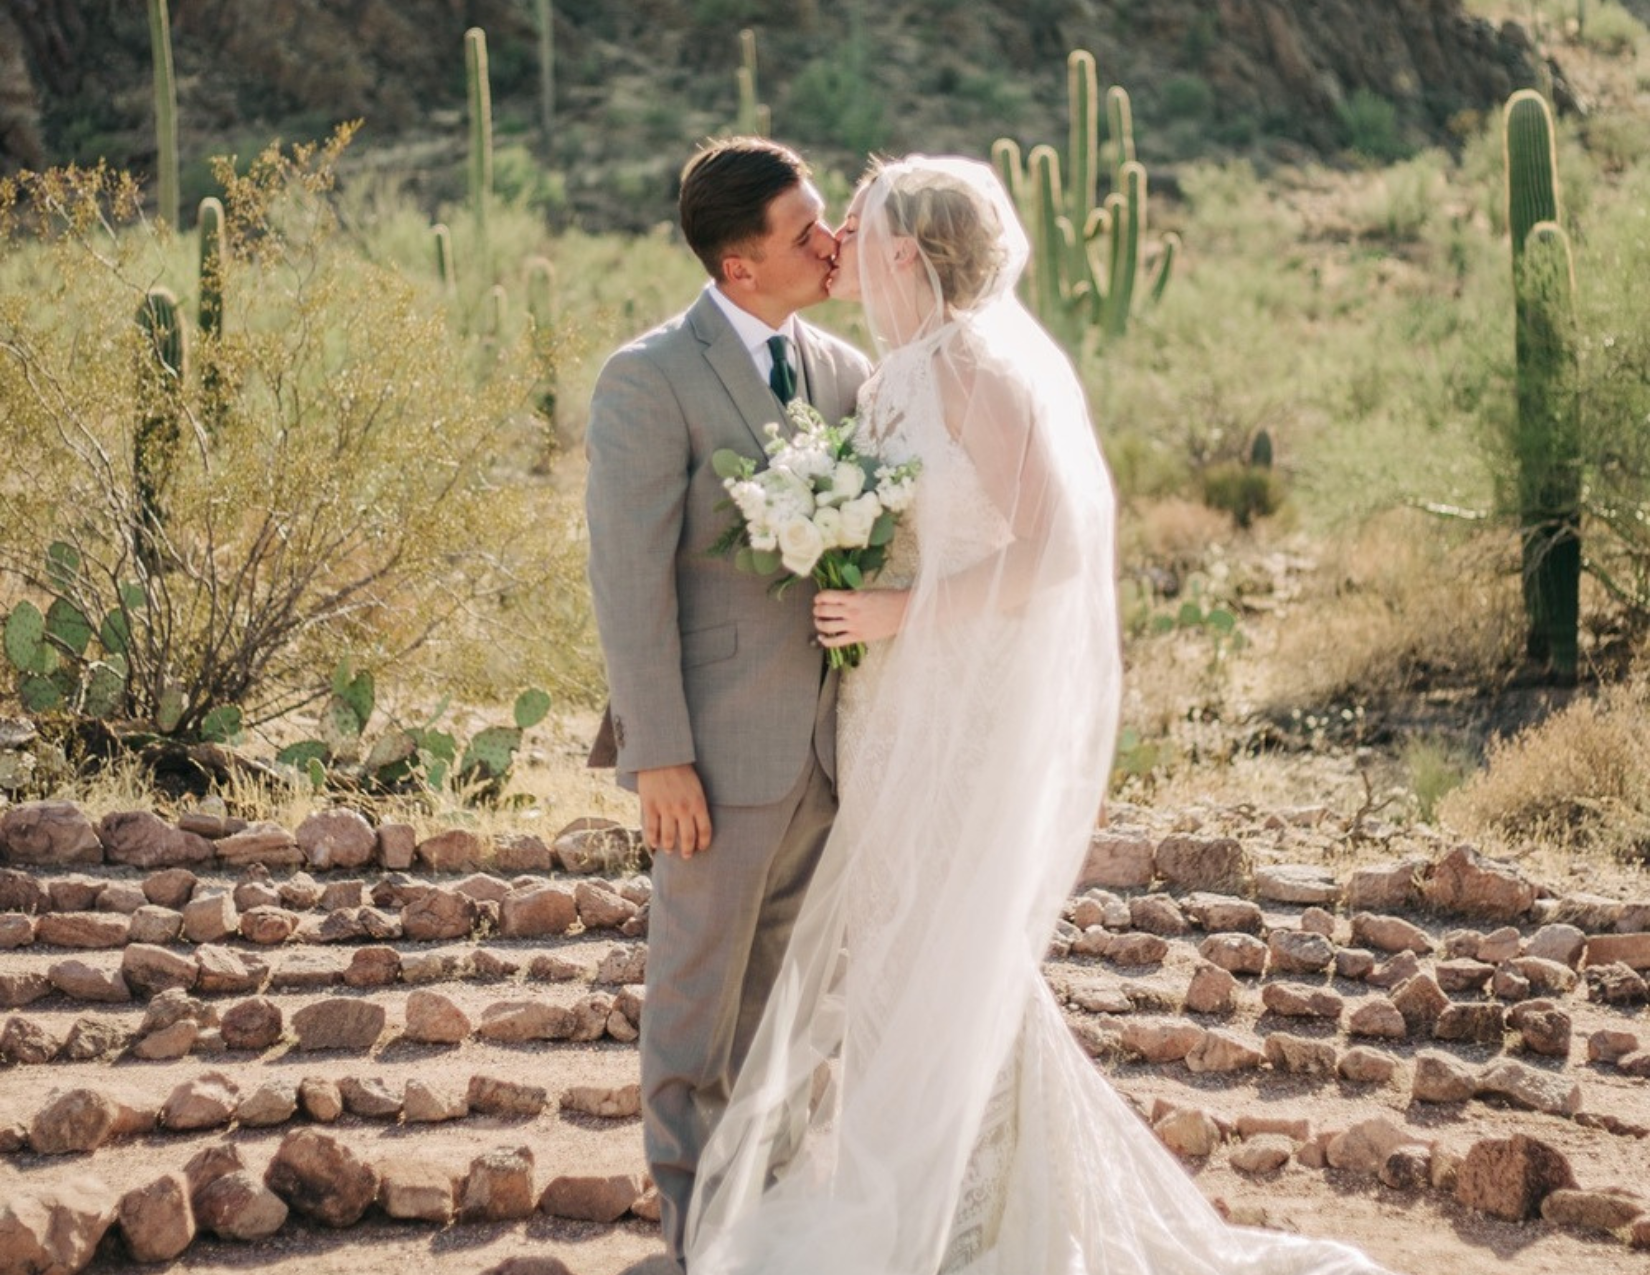 A newly wed couple sharing their first kiss surrounded by beautiful cacti at the Sanctuary Cove venue in Tucson, Arizona